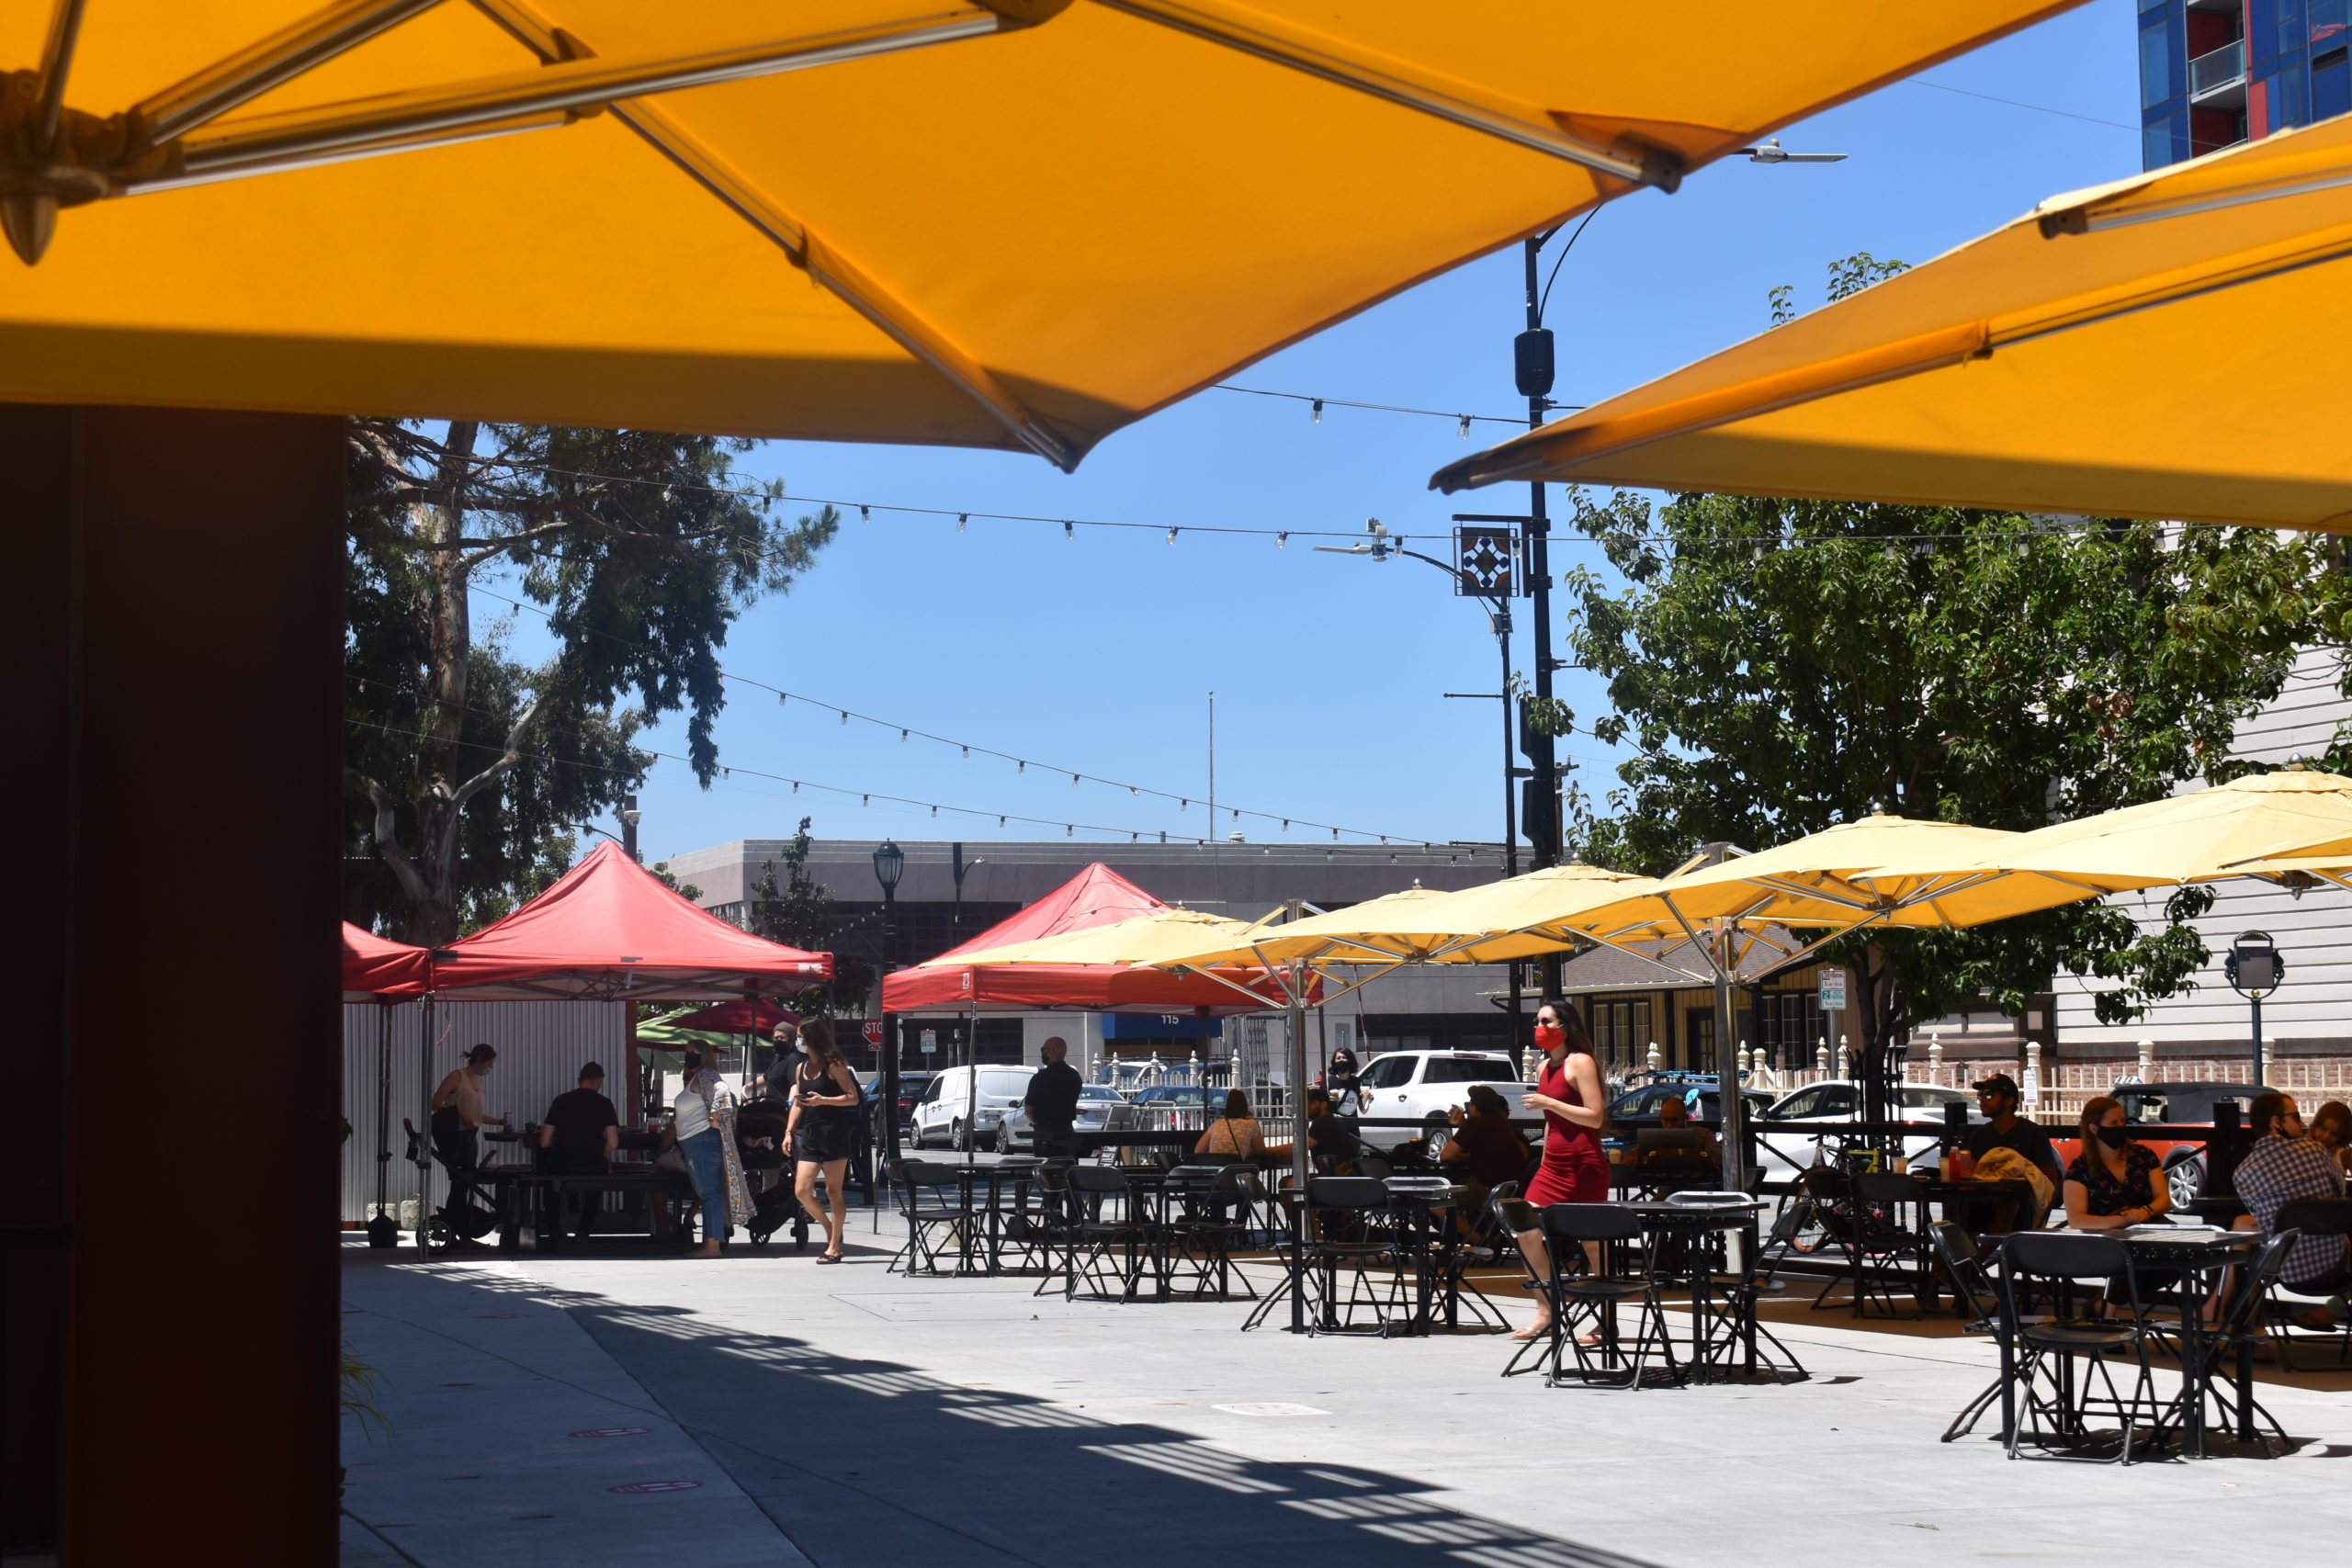 Outdoor dining is back on, but San Jose restaurateurs are confused and